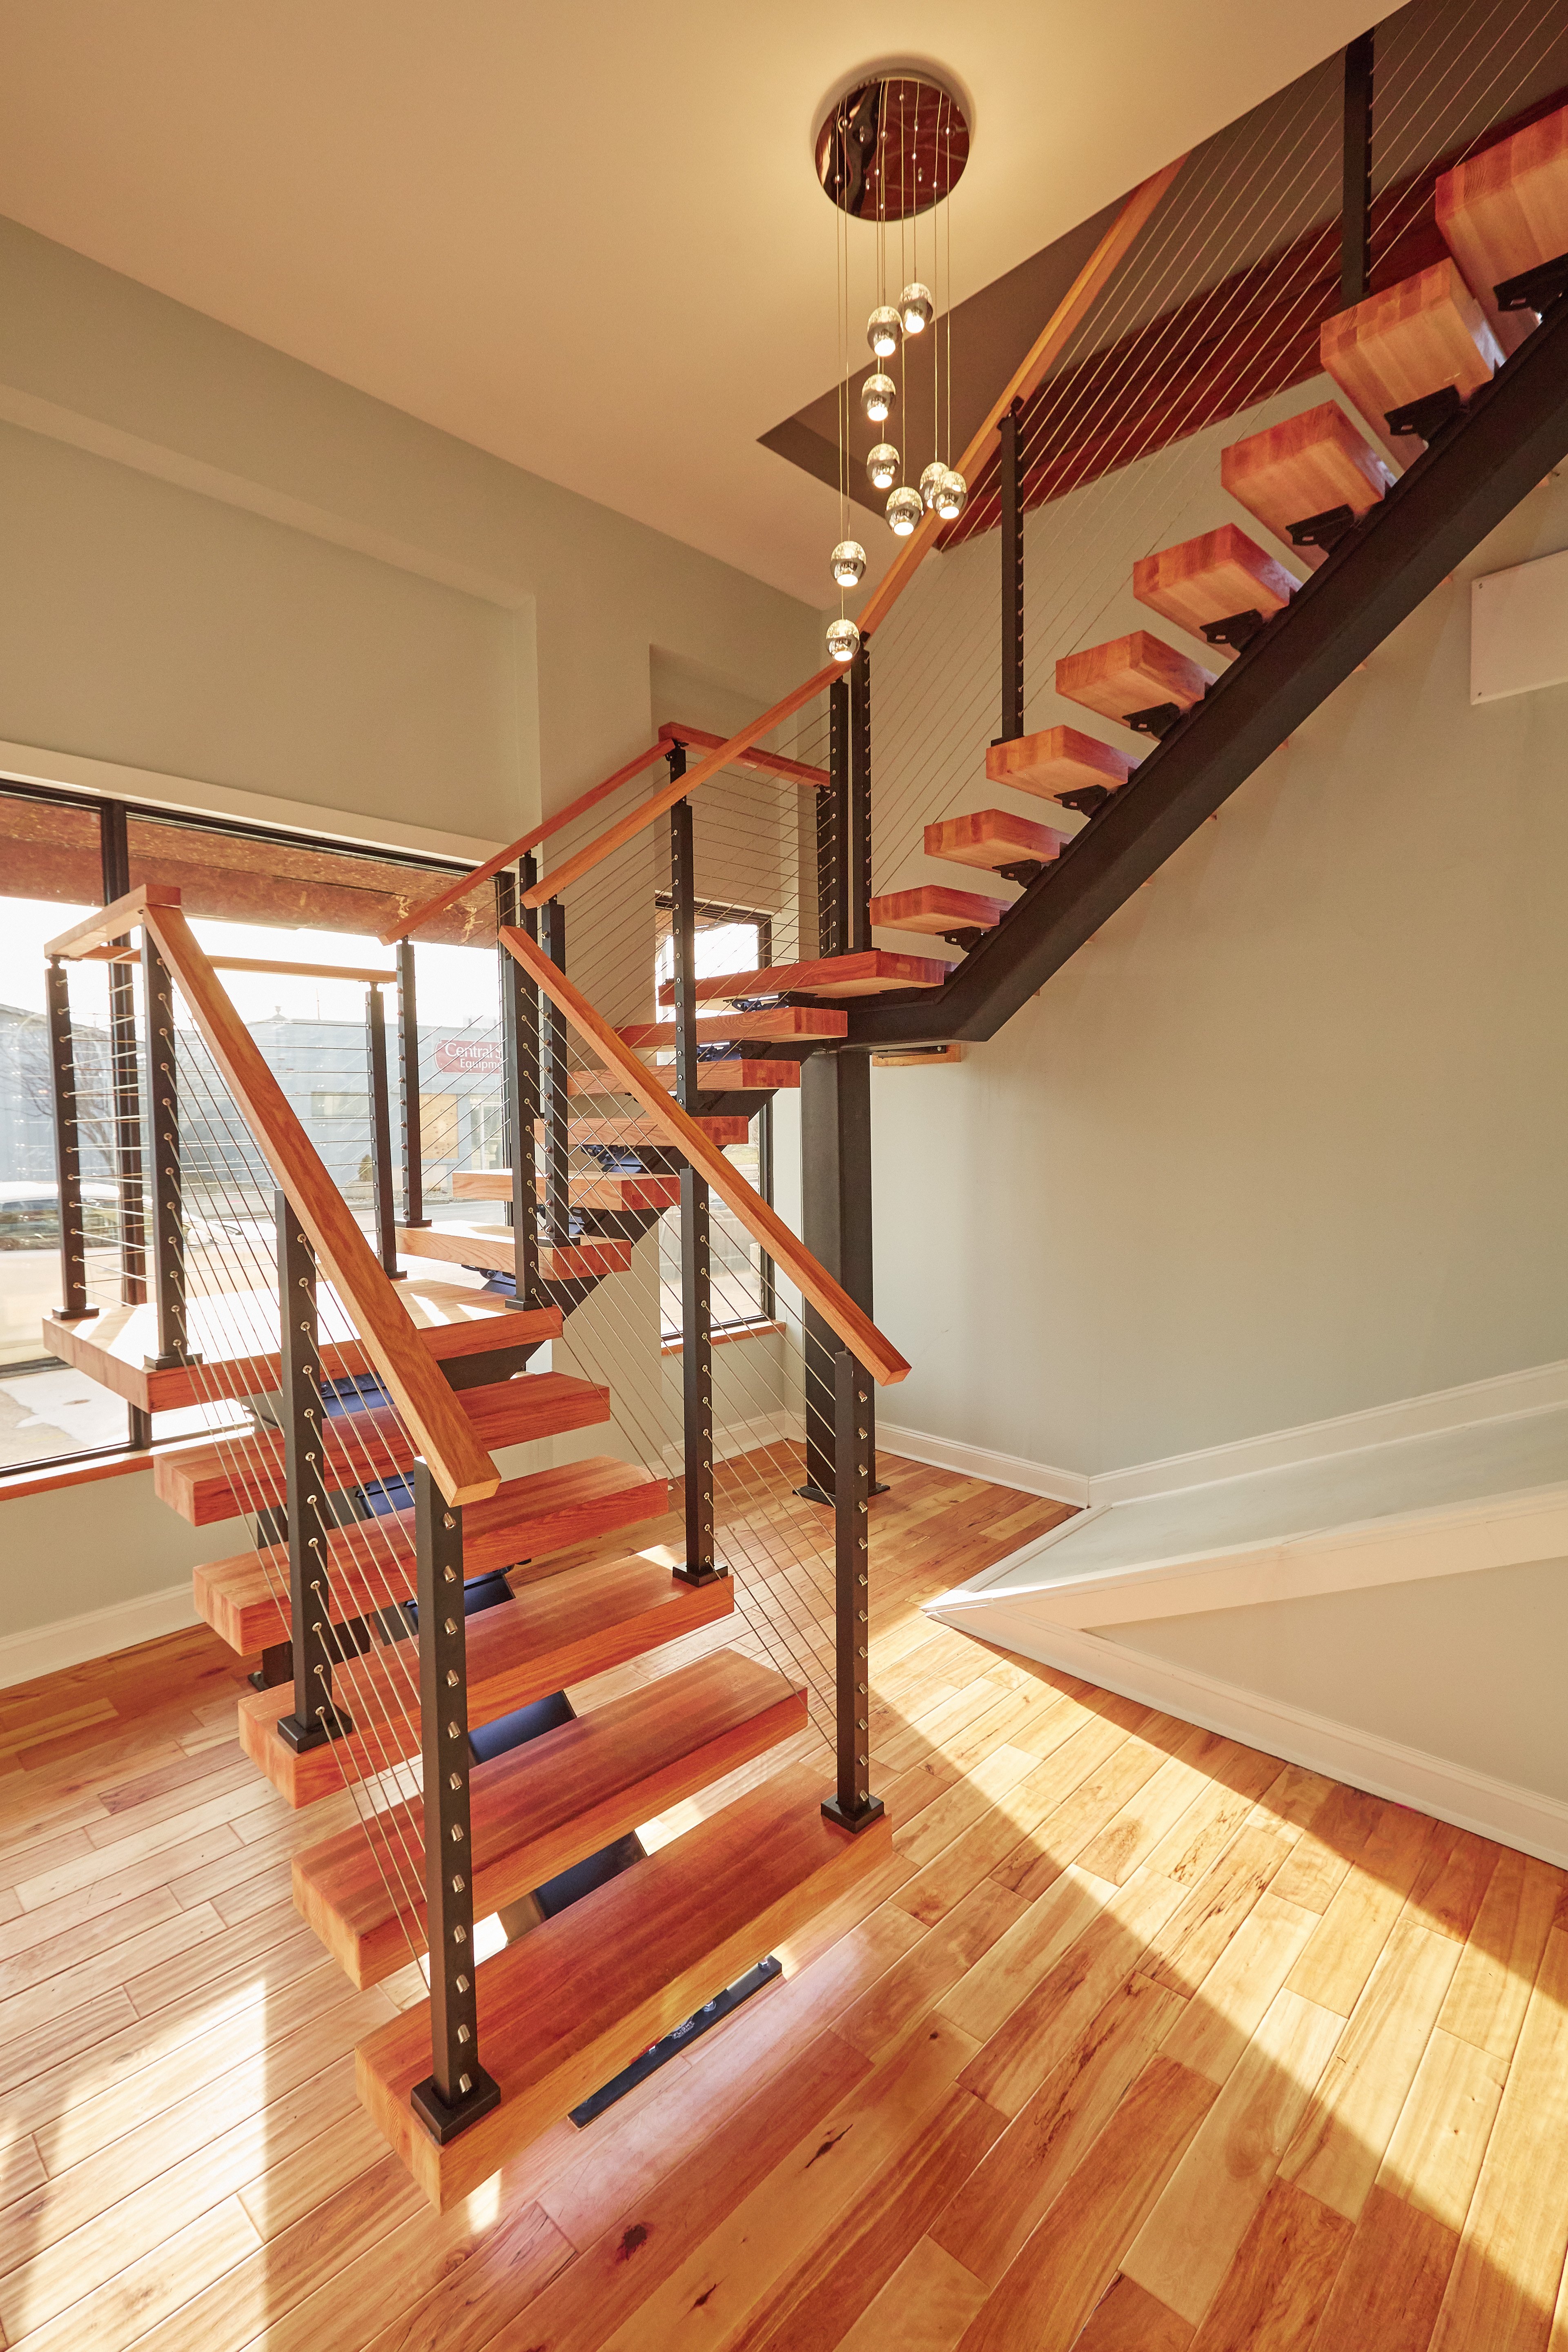 How to Install a Stair Railing (Step-by-Step Instructions)